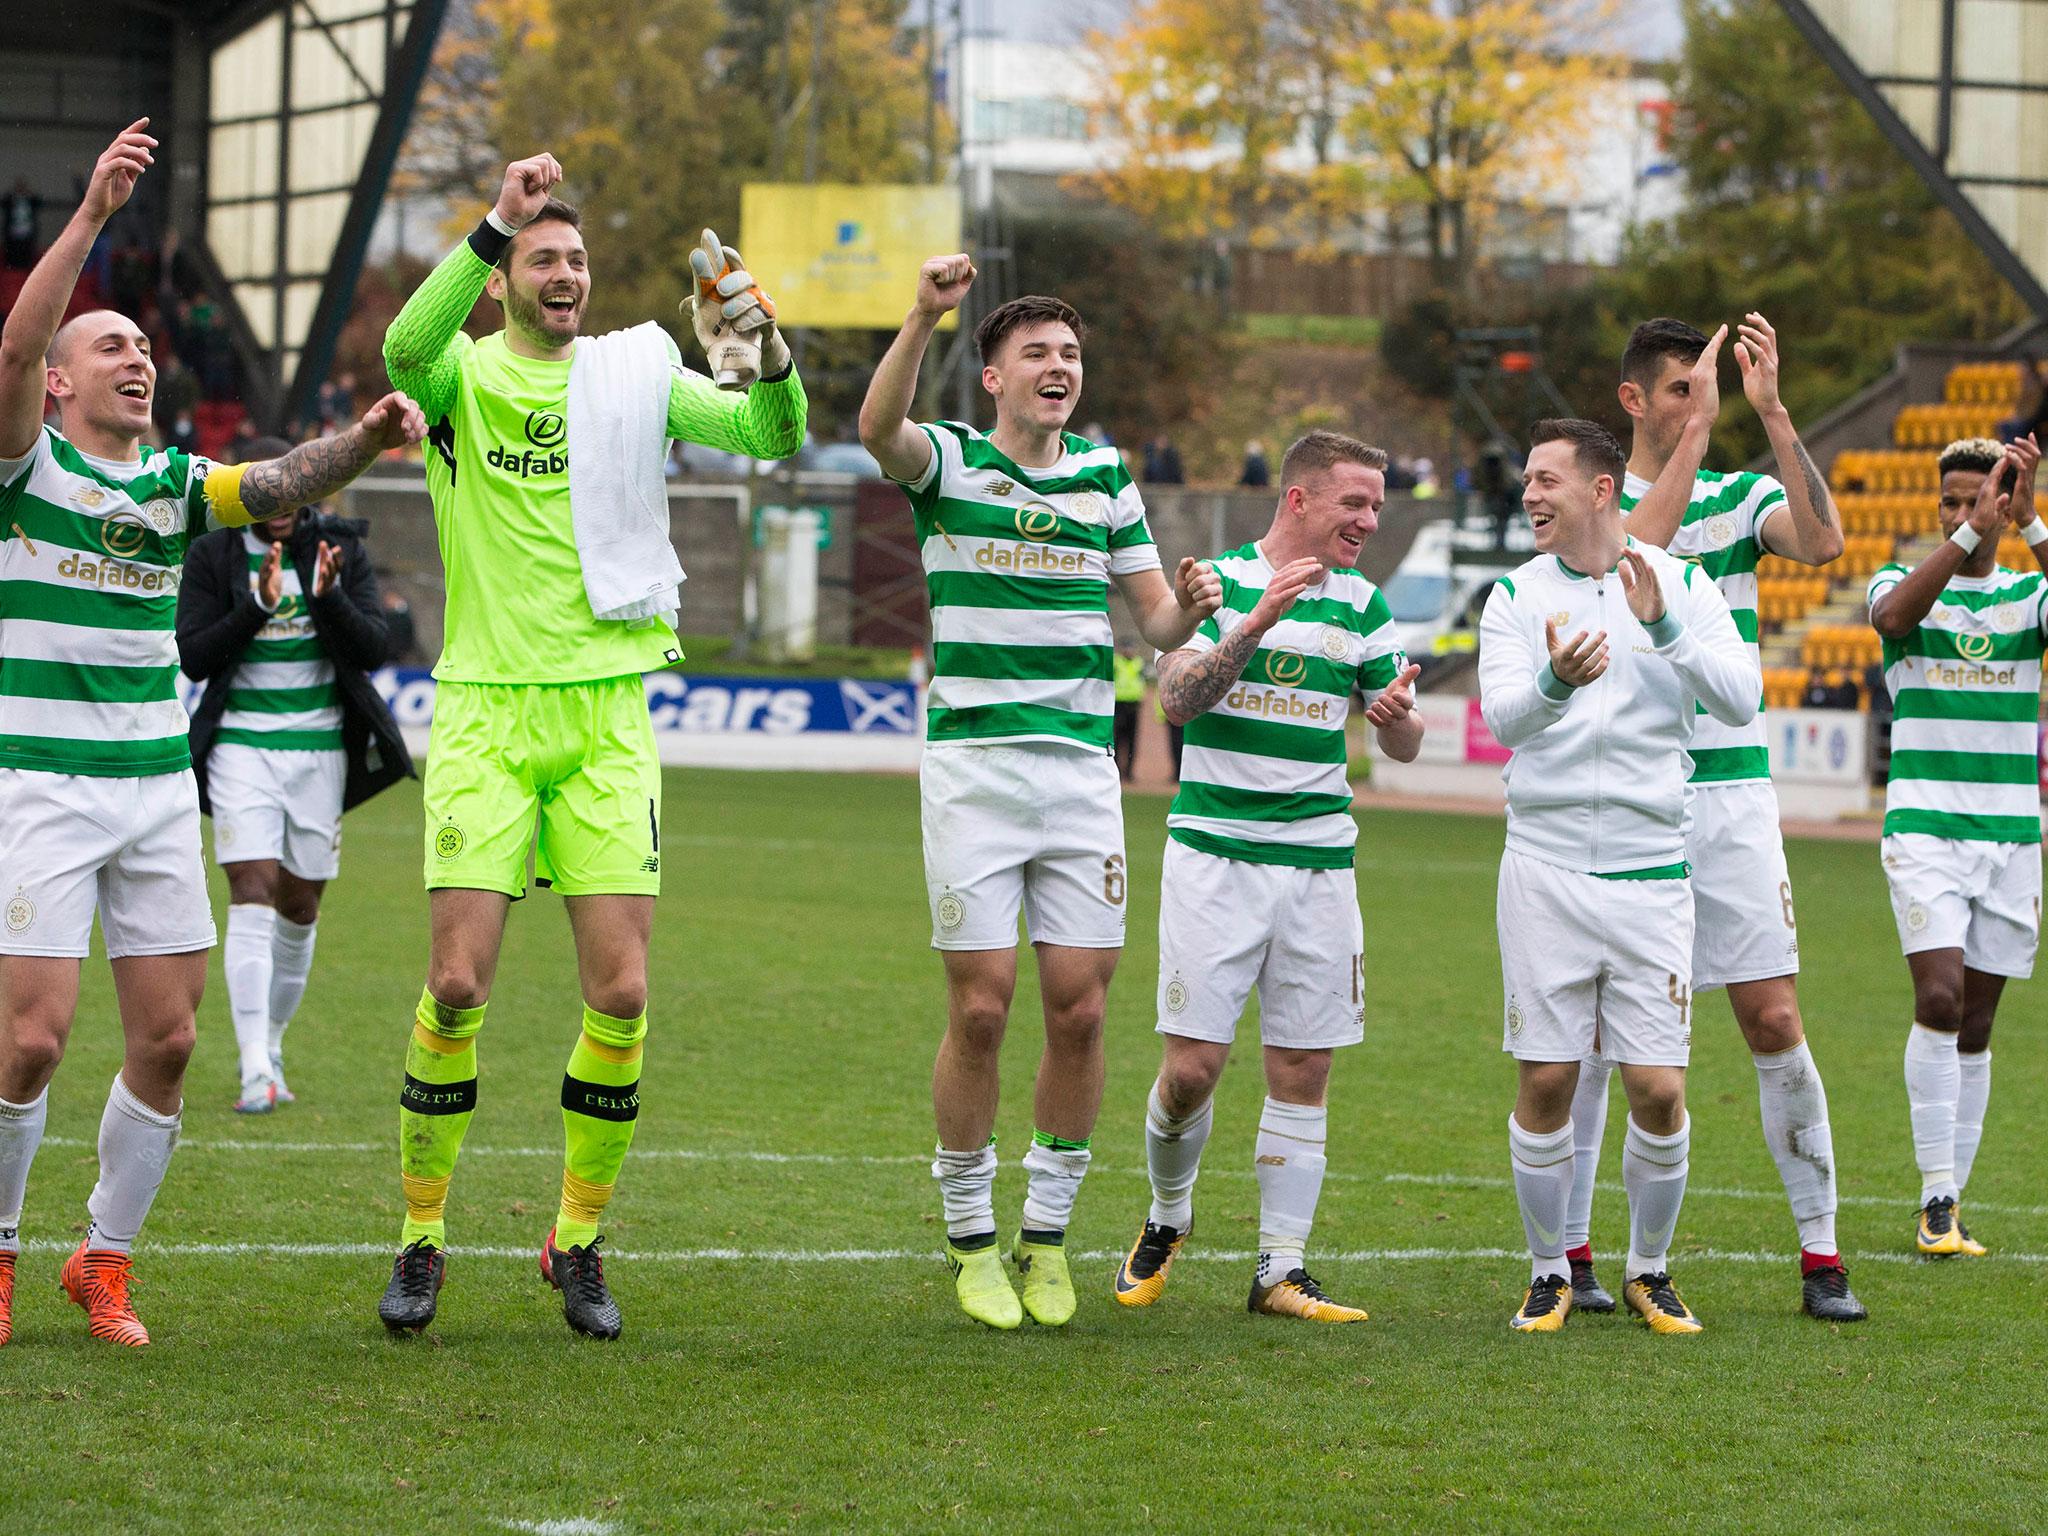 Celtic broke a 100-year-old record with their 63rd consecutive match without defeat